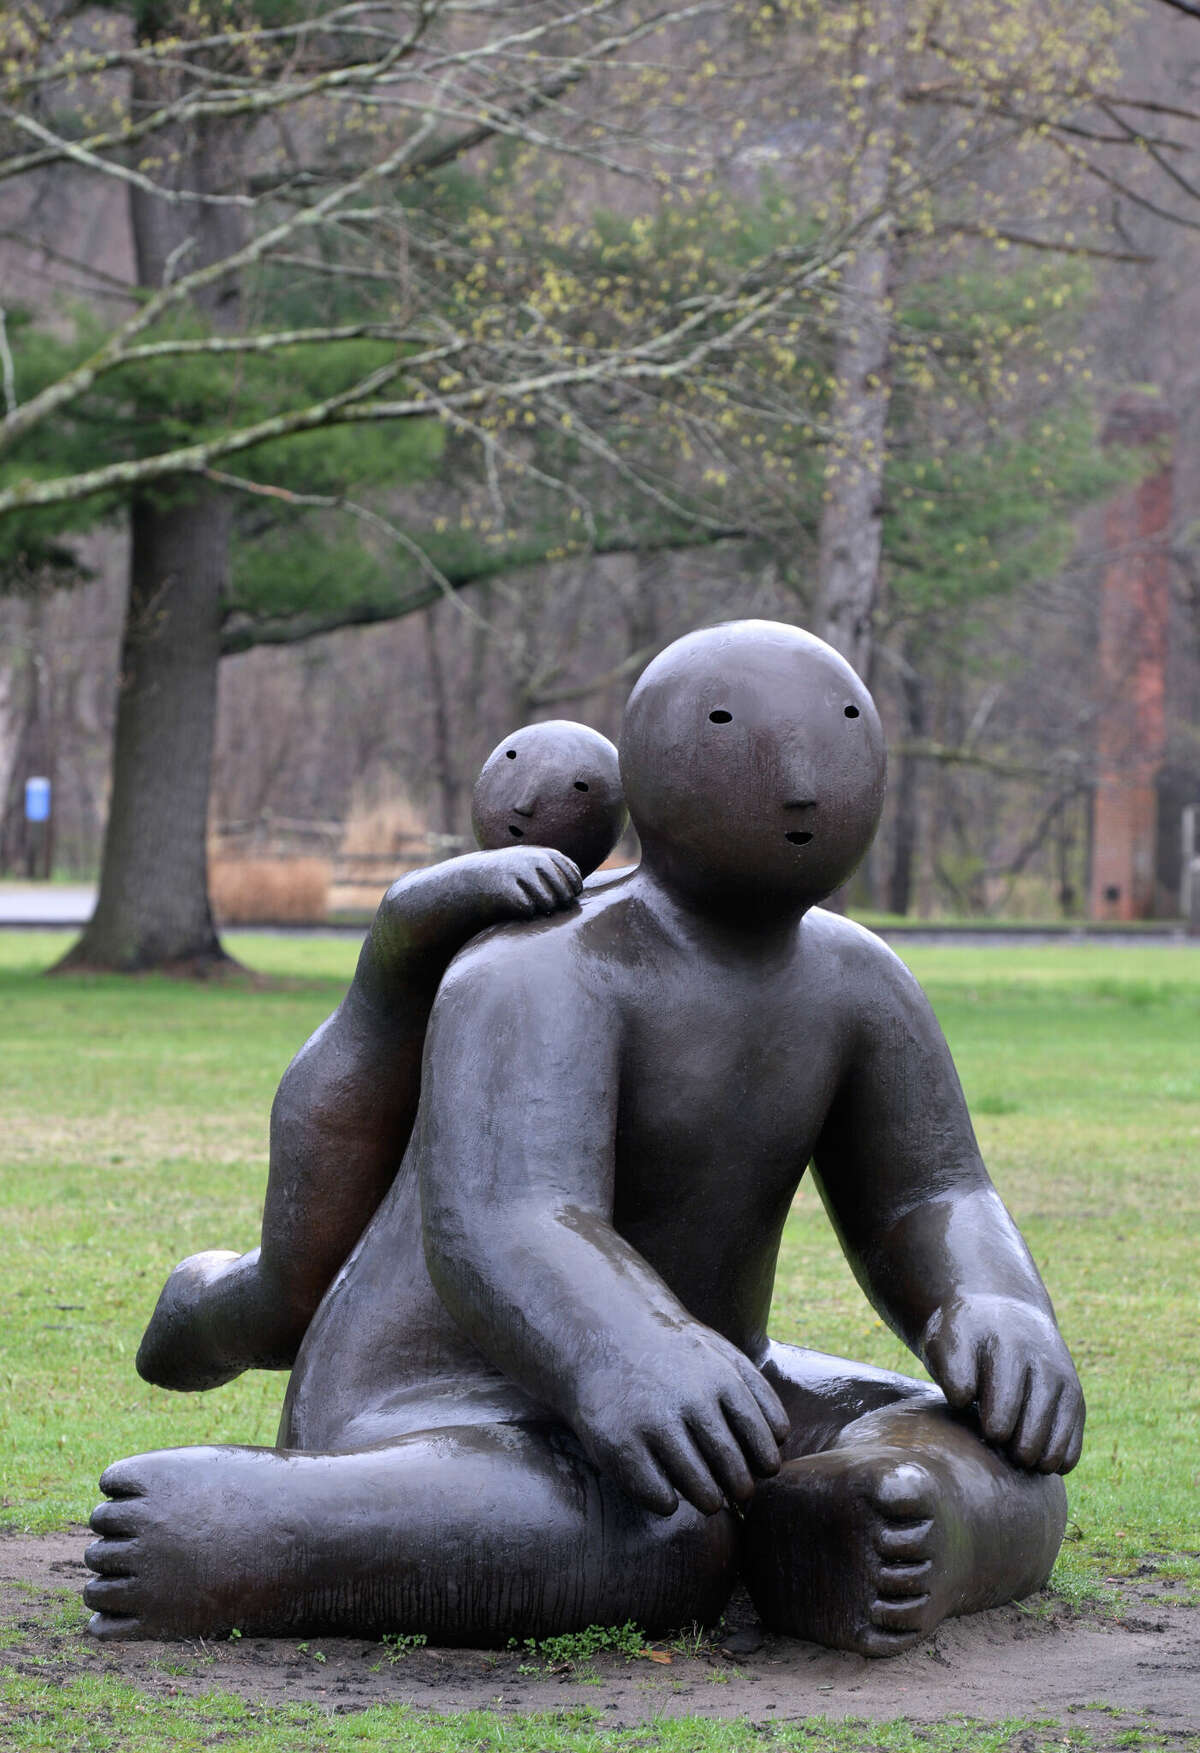 "One leaning on another" by Joy Brown in a park in downtown Kent, Conn. Thursday, April 30, 2020.